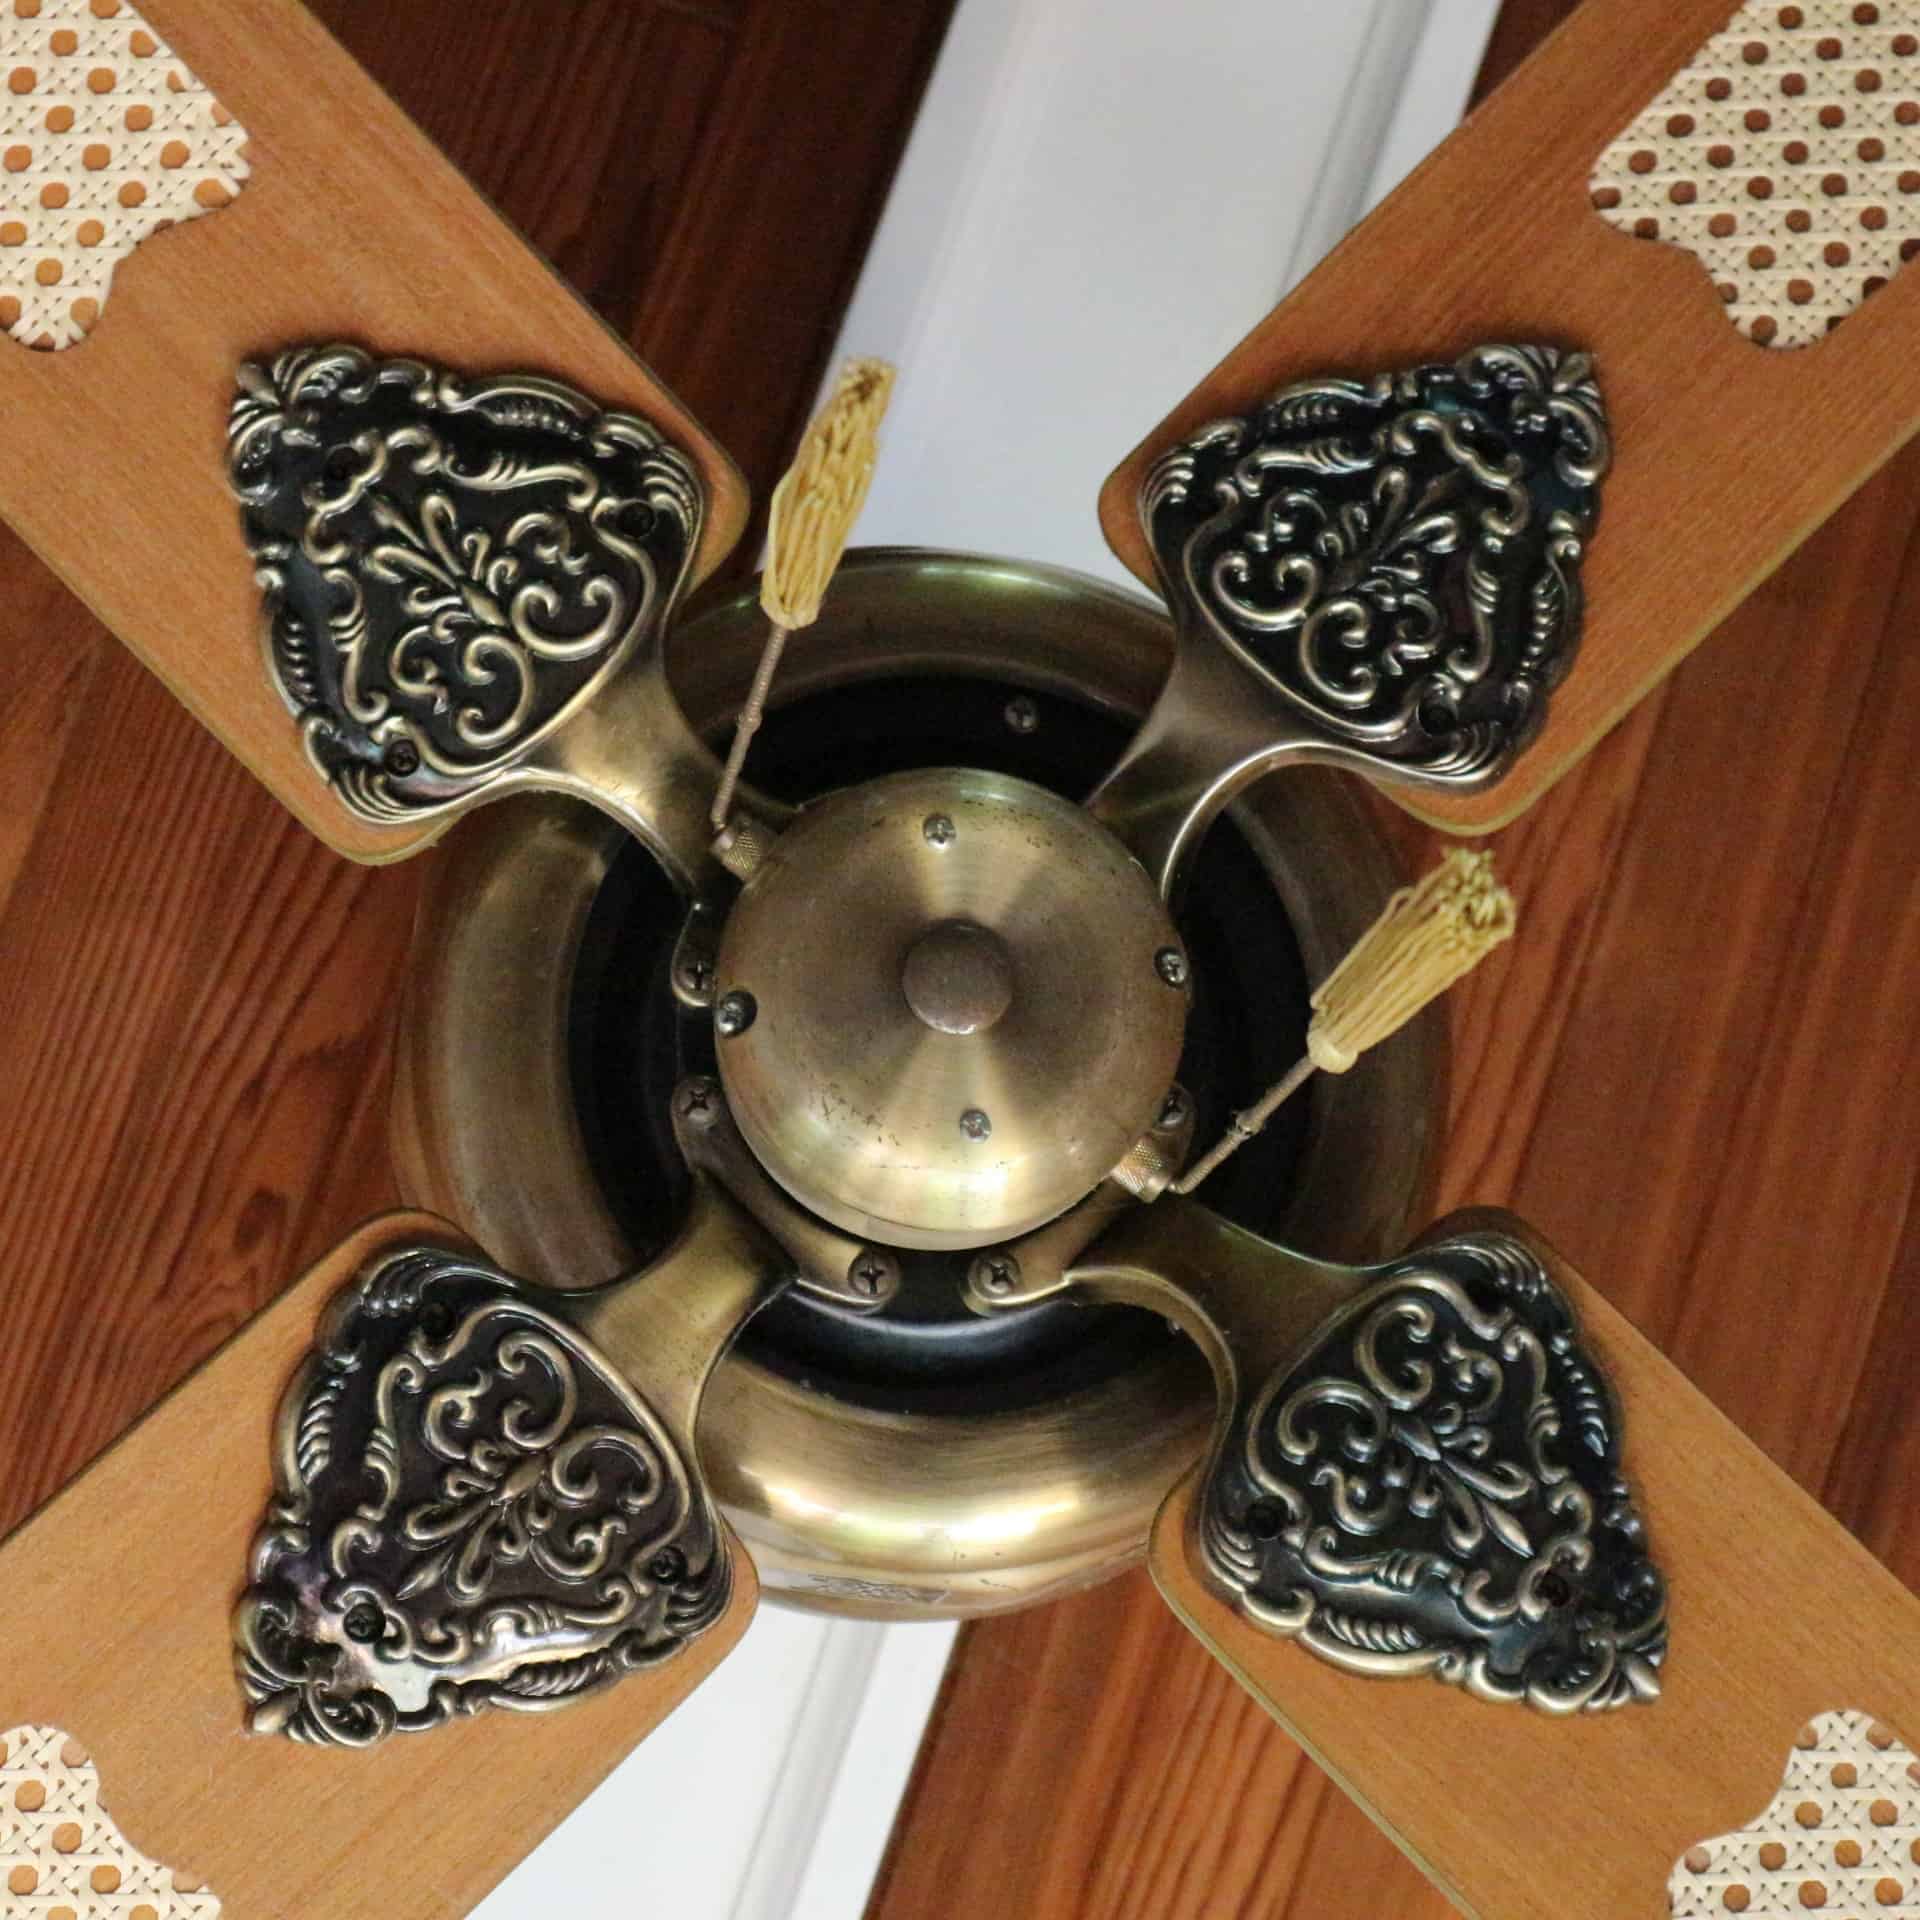 How To Fix Drooping Outdoor Ceiling Fan Blades